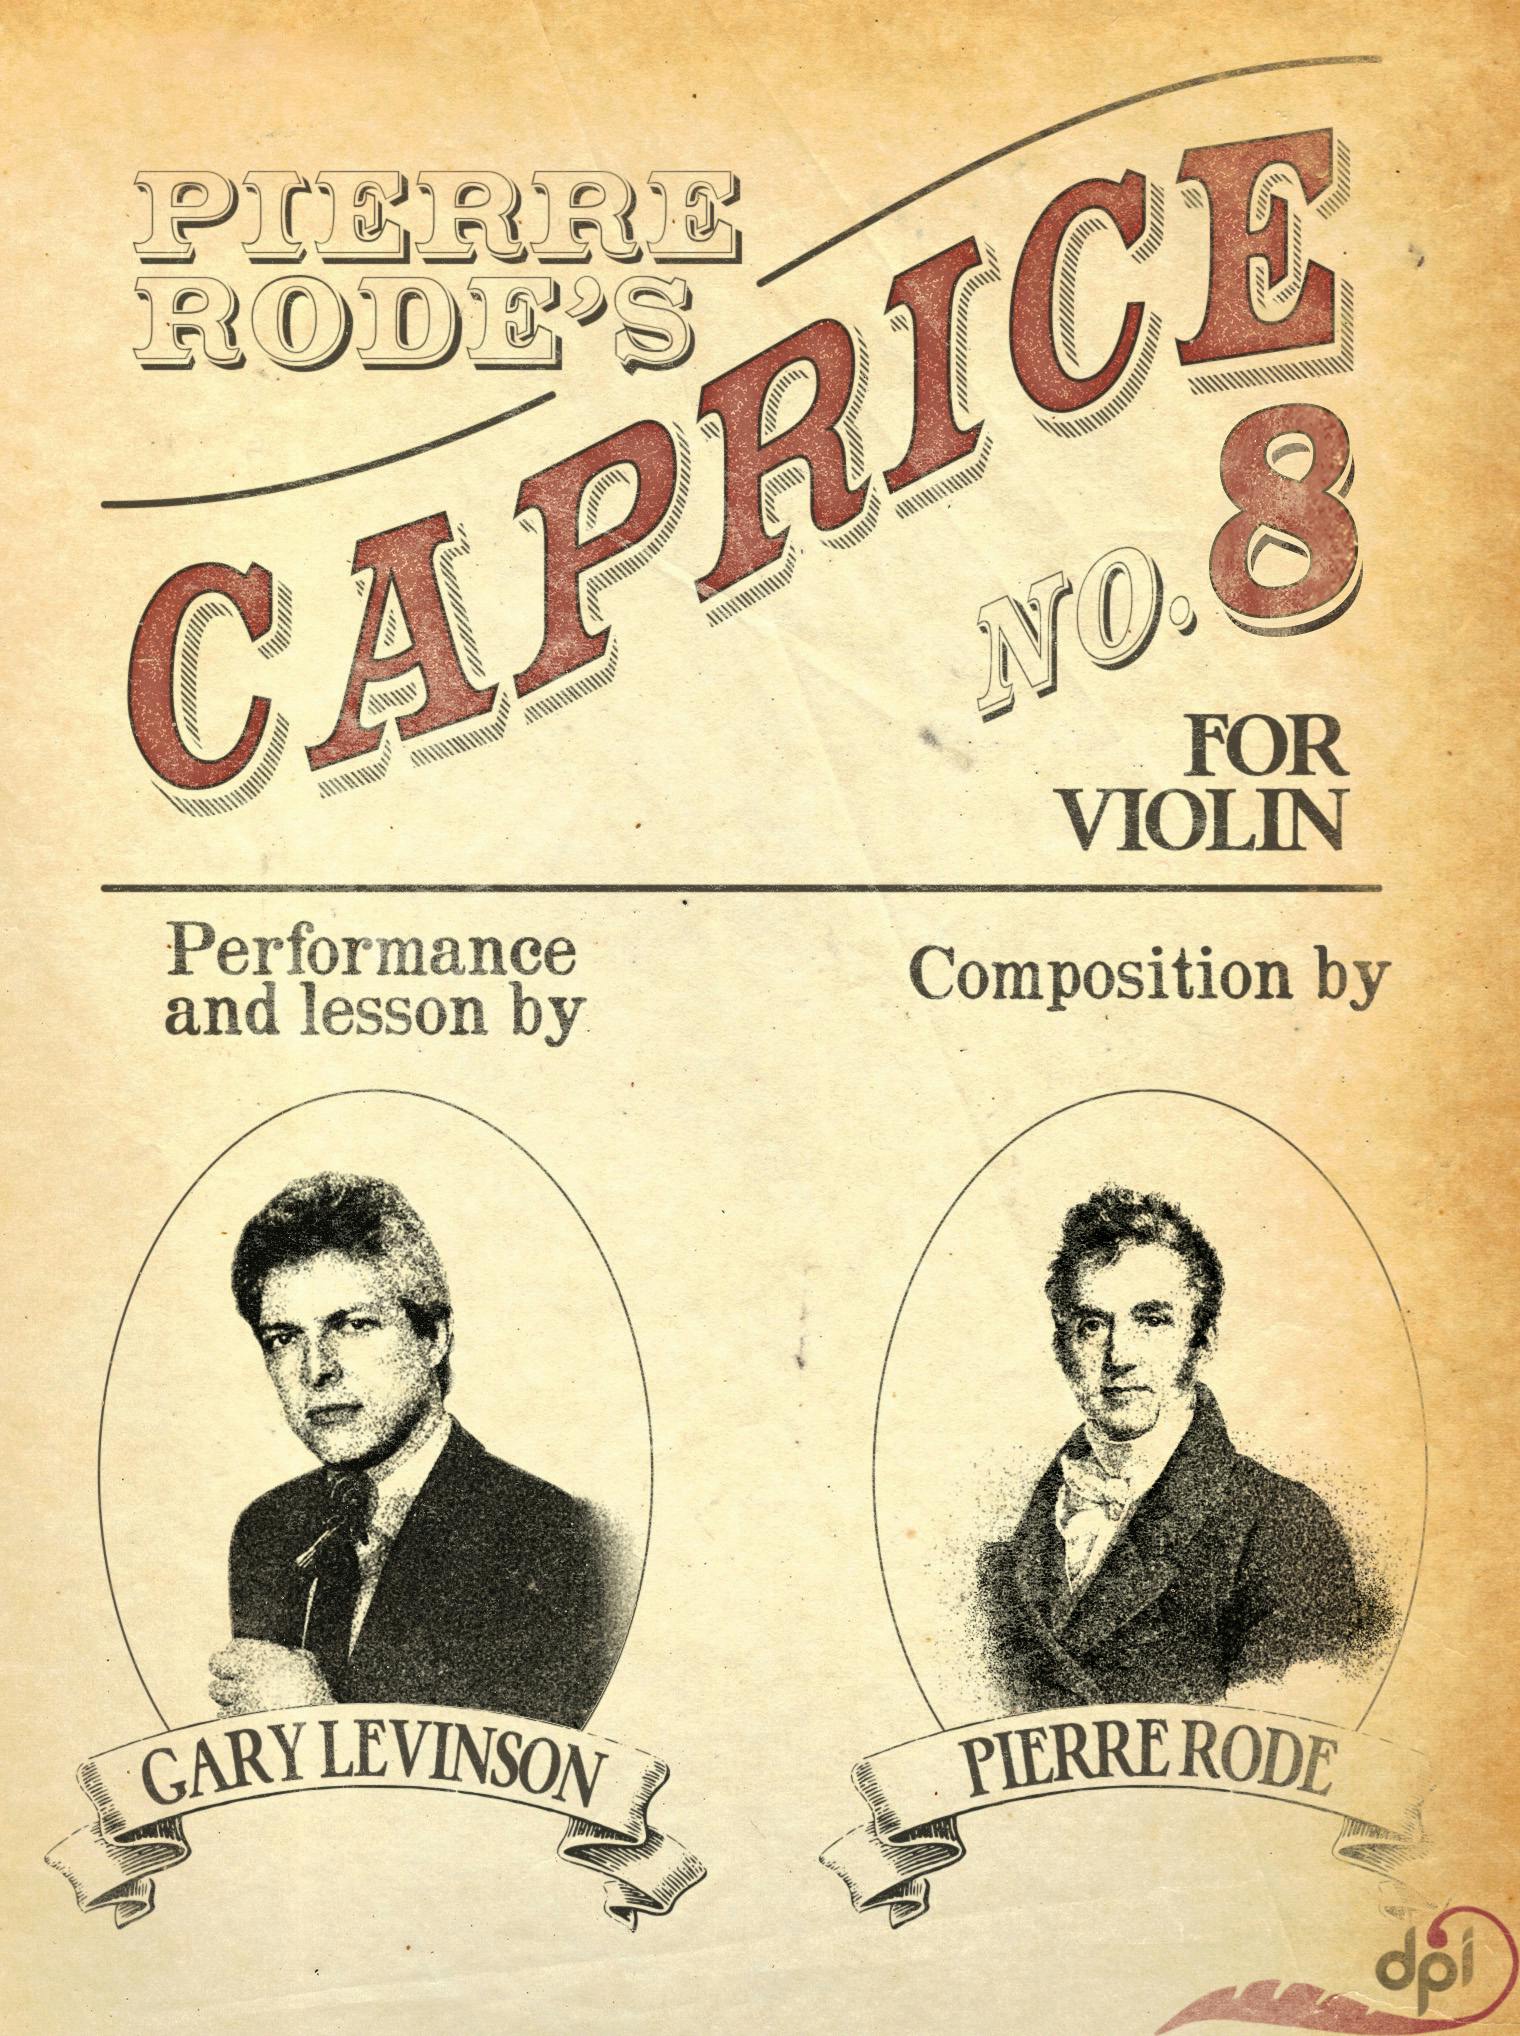 Pierre Rode's Caprice No. 8 cover